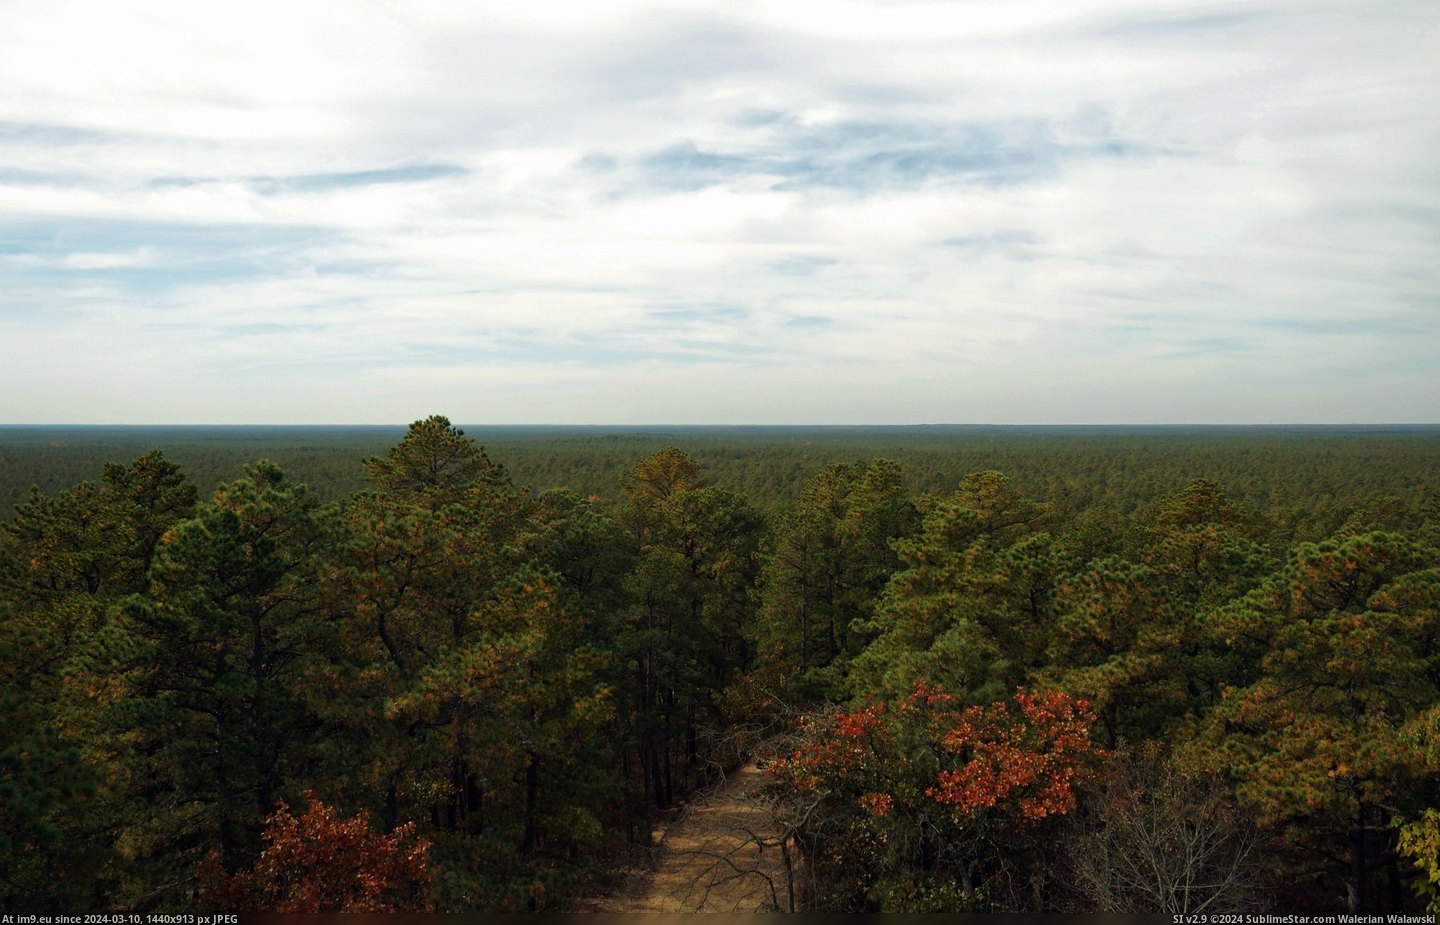 #Fire #Tower #Apple #Pine #Endless #Barrens #Hill #Pie #Jersey [Earthporn] [OC] Endless pine barrens, from the Apple Pie Hill fire tower in New Jersey [2819 x 1800] Pic. (Image of album My r/EARTHPORN favs))